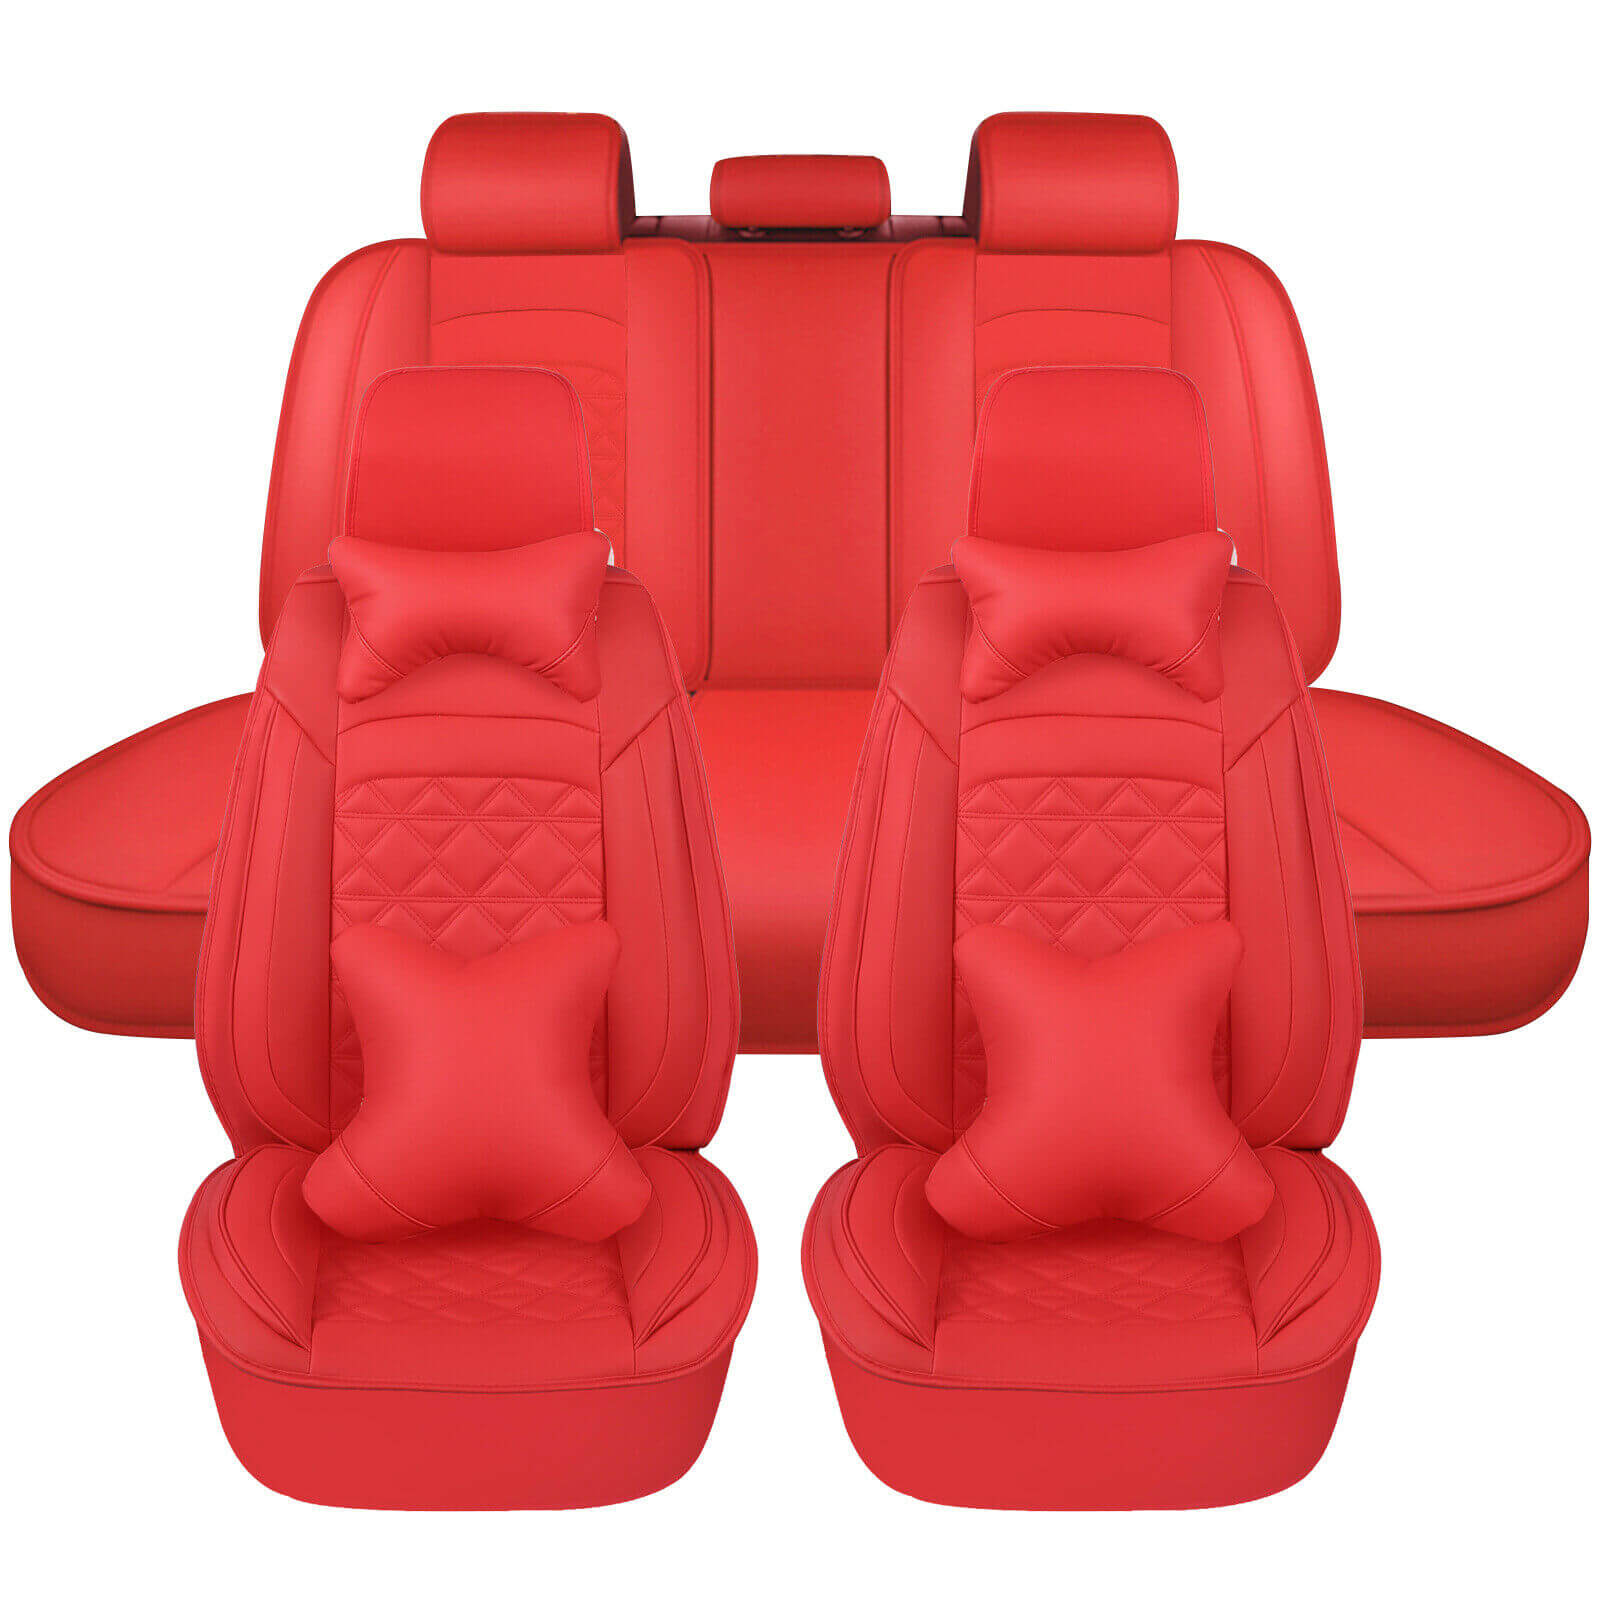 Red of Universal Full Surrounded Leather Car Seat Covers